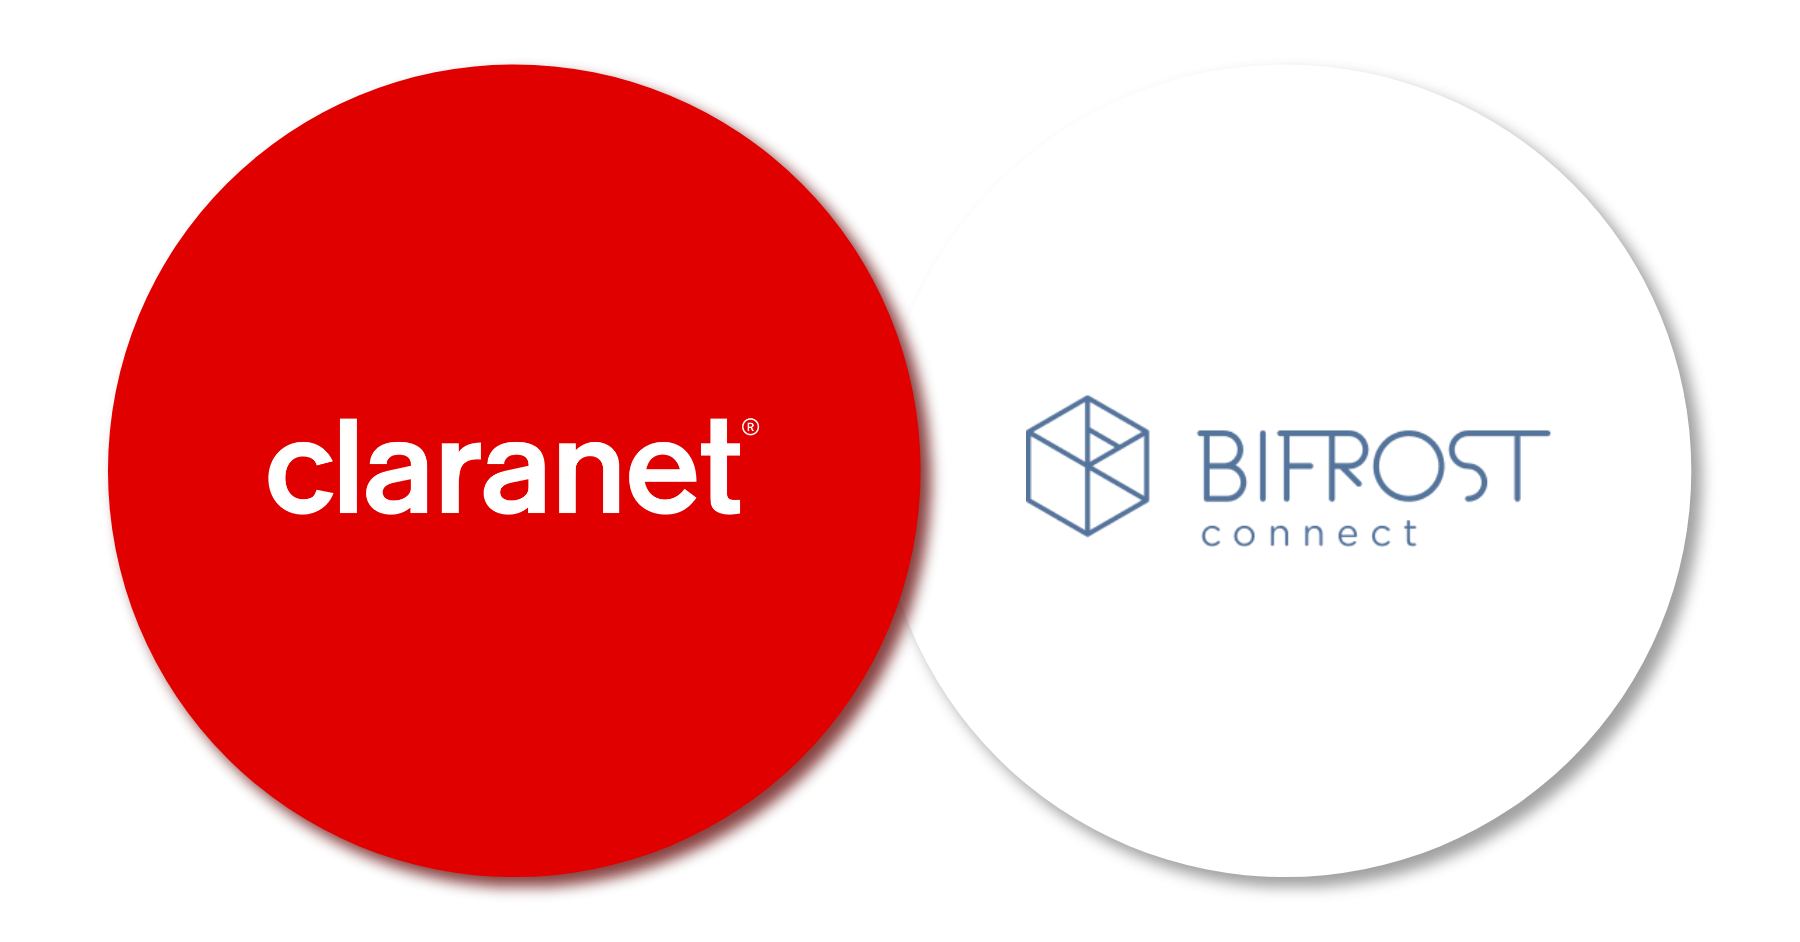 Claranet - Bifrost Connect